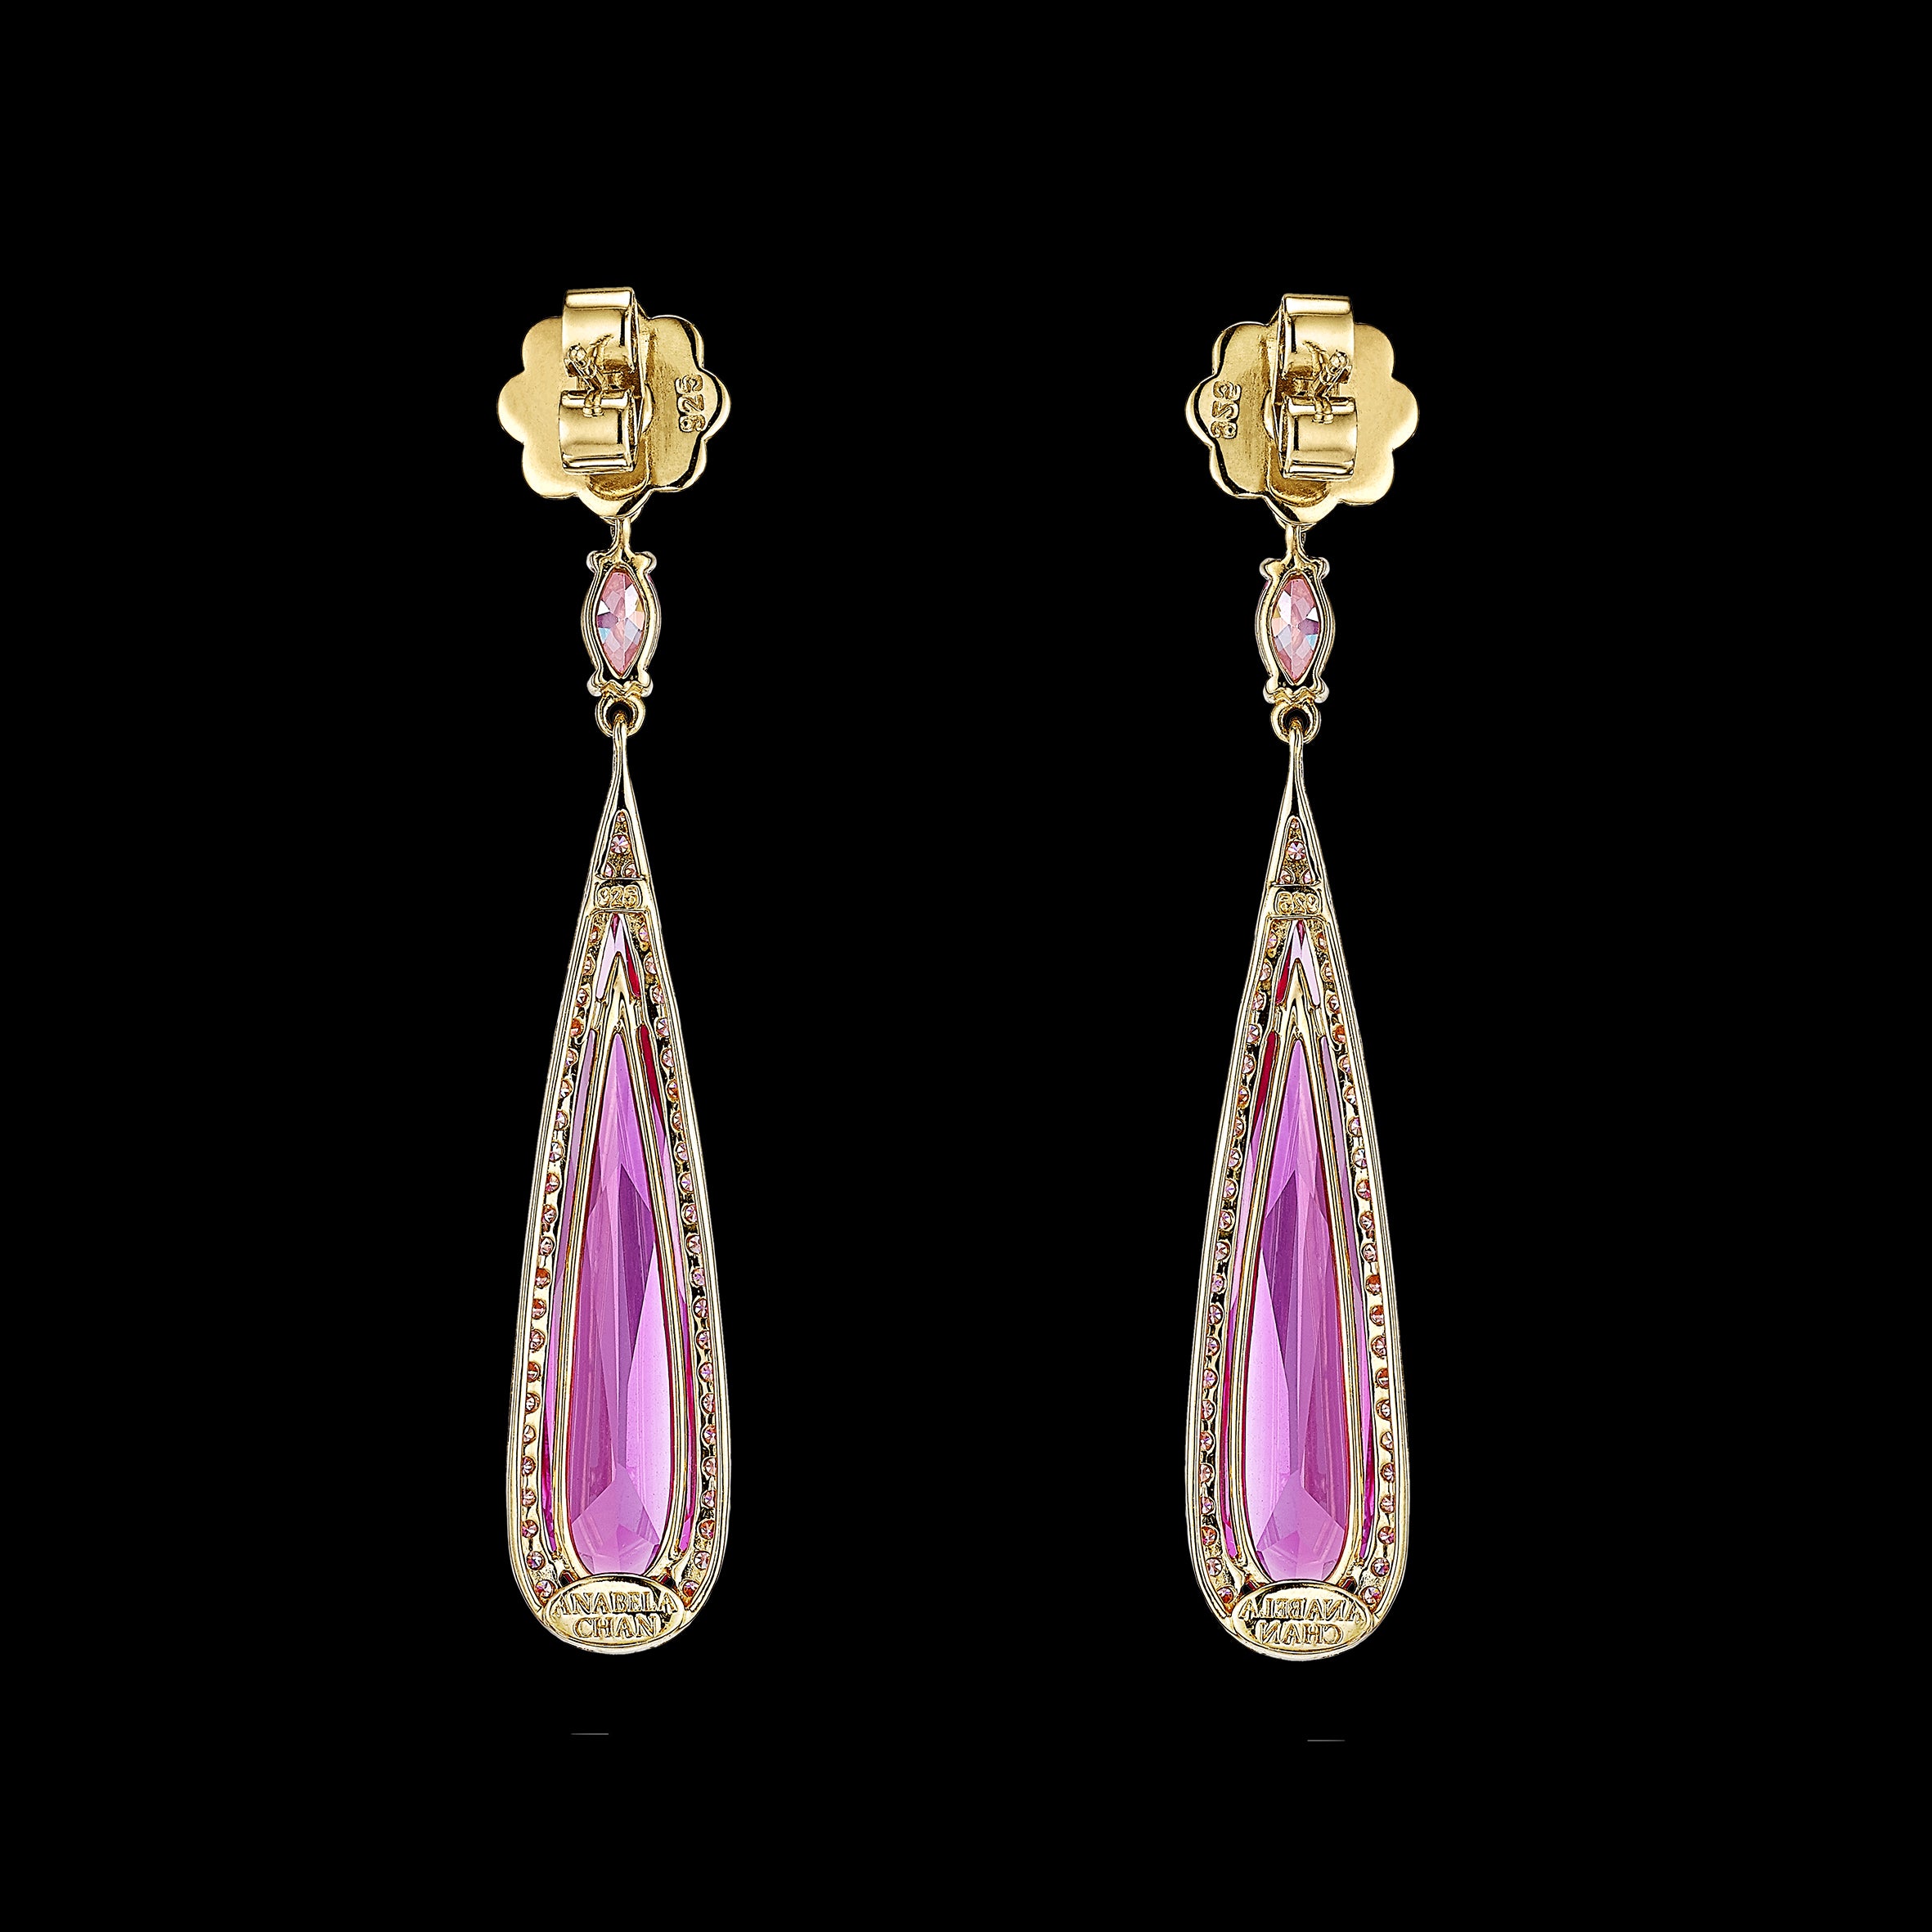 Fuchsia Shard Earrings, Earring, Anabela Chan Joaillerie - Fine jewelry with laboratory grown and created gemstones hand-crafted in the United Kingdom. Anabela Chan Joaillerie is the first fine jewellery brand in the world to champion laboratory-grown and created gemstones with high jewellery design, artisanal craftsmanship and a focus on ethical and sustainable innovations.